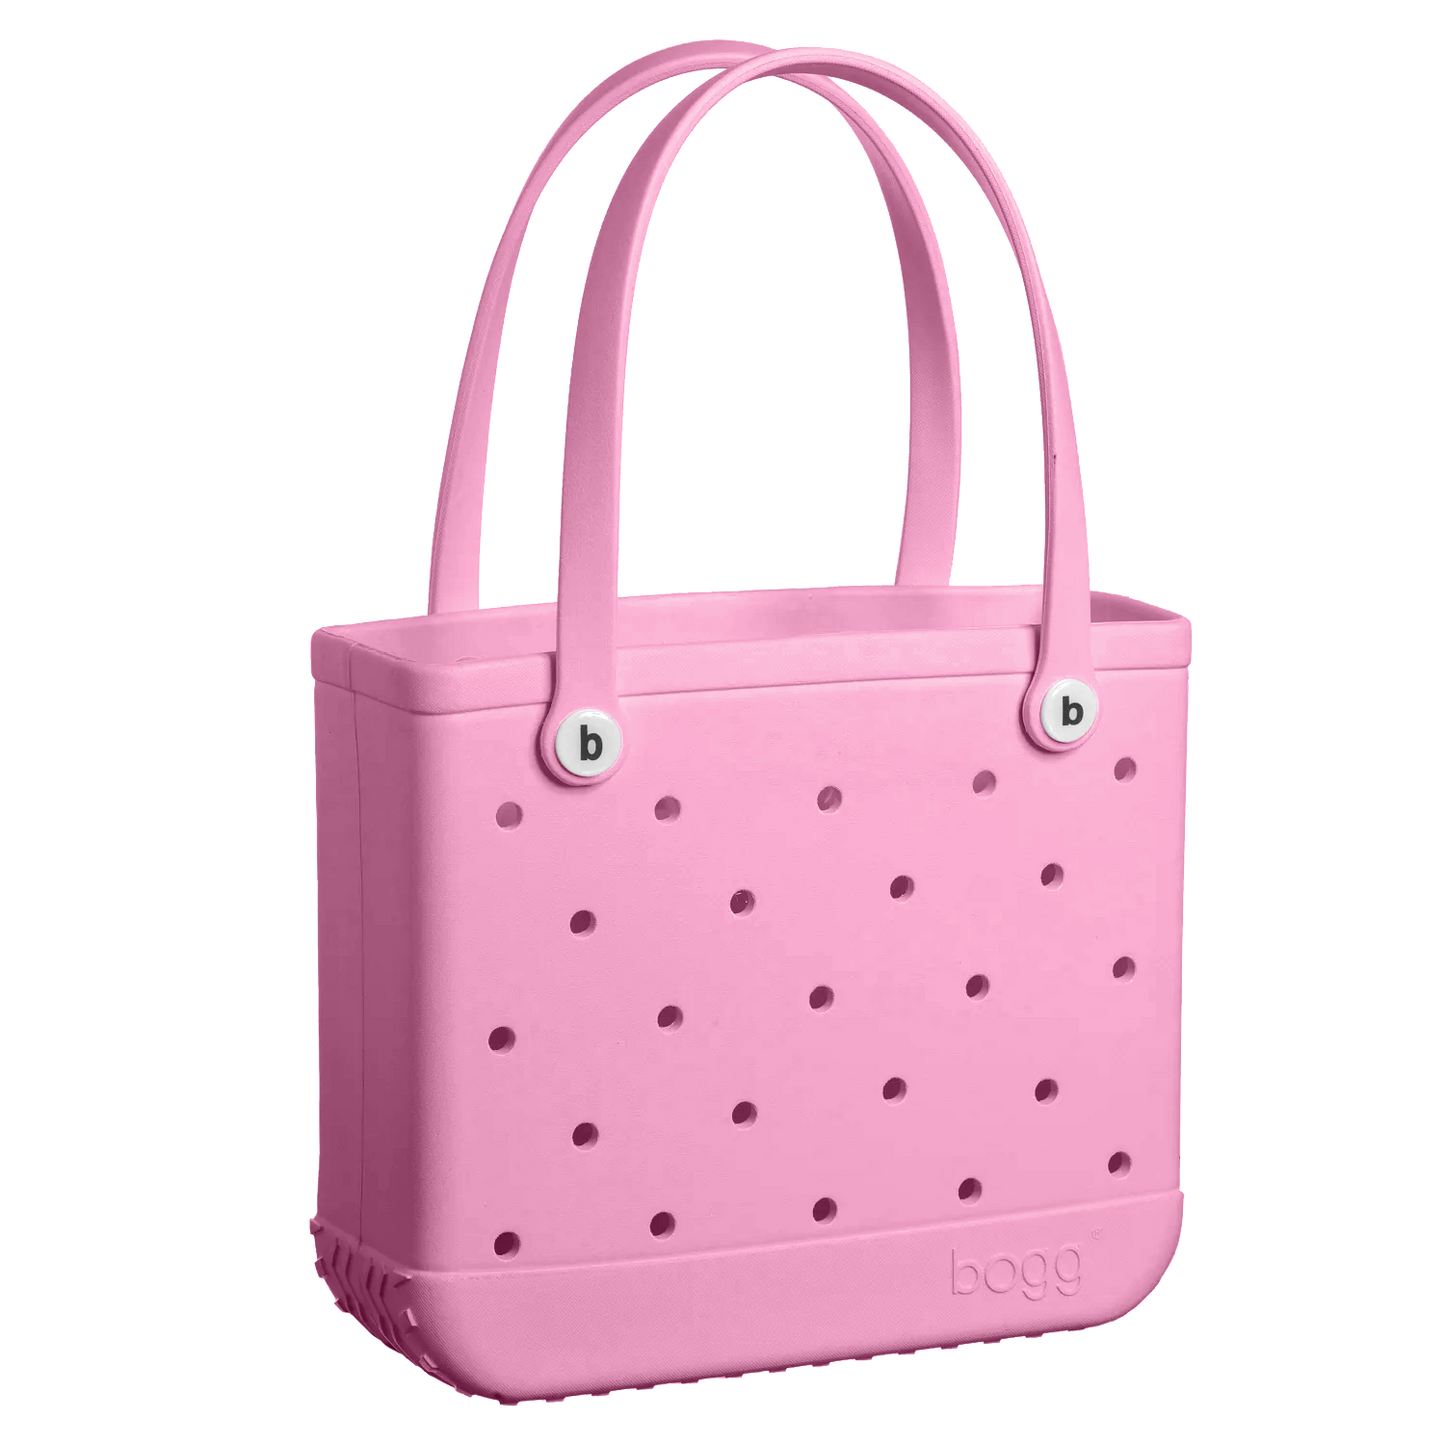 Baby Bogg® Bag - blowing PINK bubbles